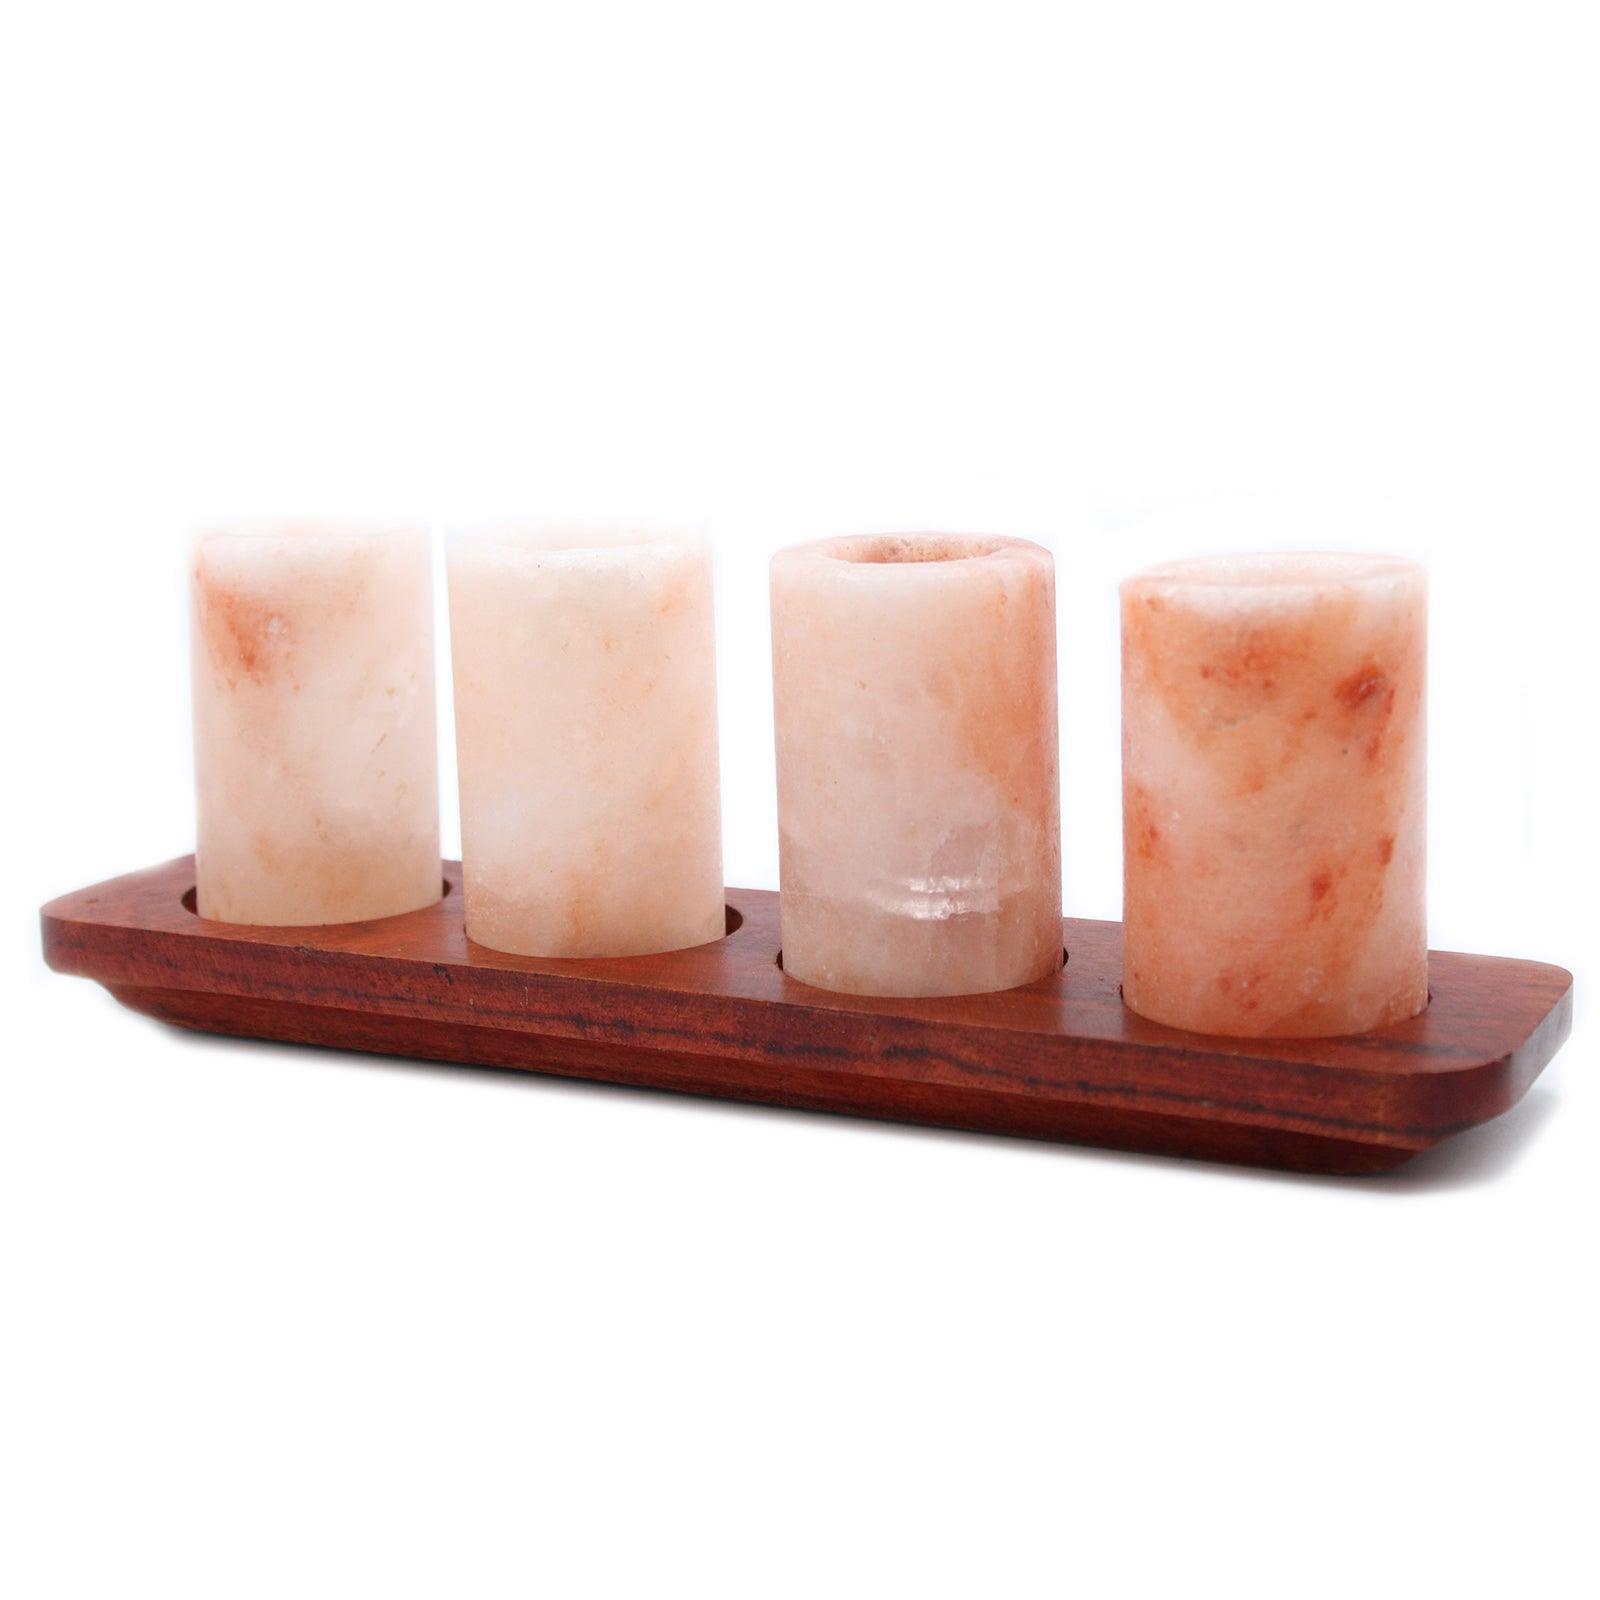 Set of 4 Himalayan Salt Shot Glasses & Wood Serving Stand - Charming Spaces